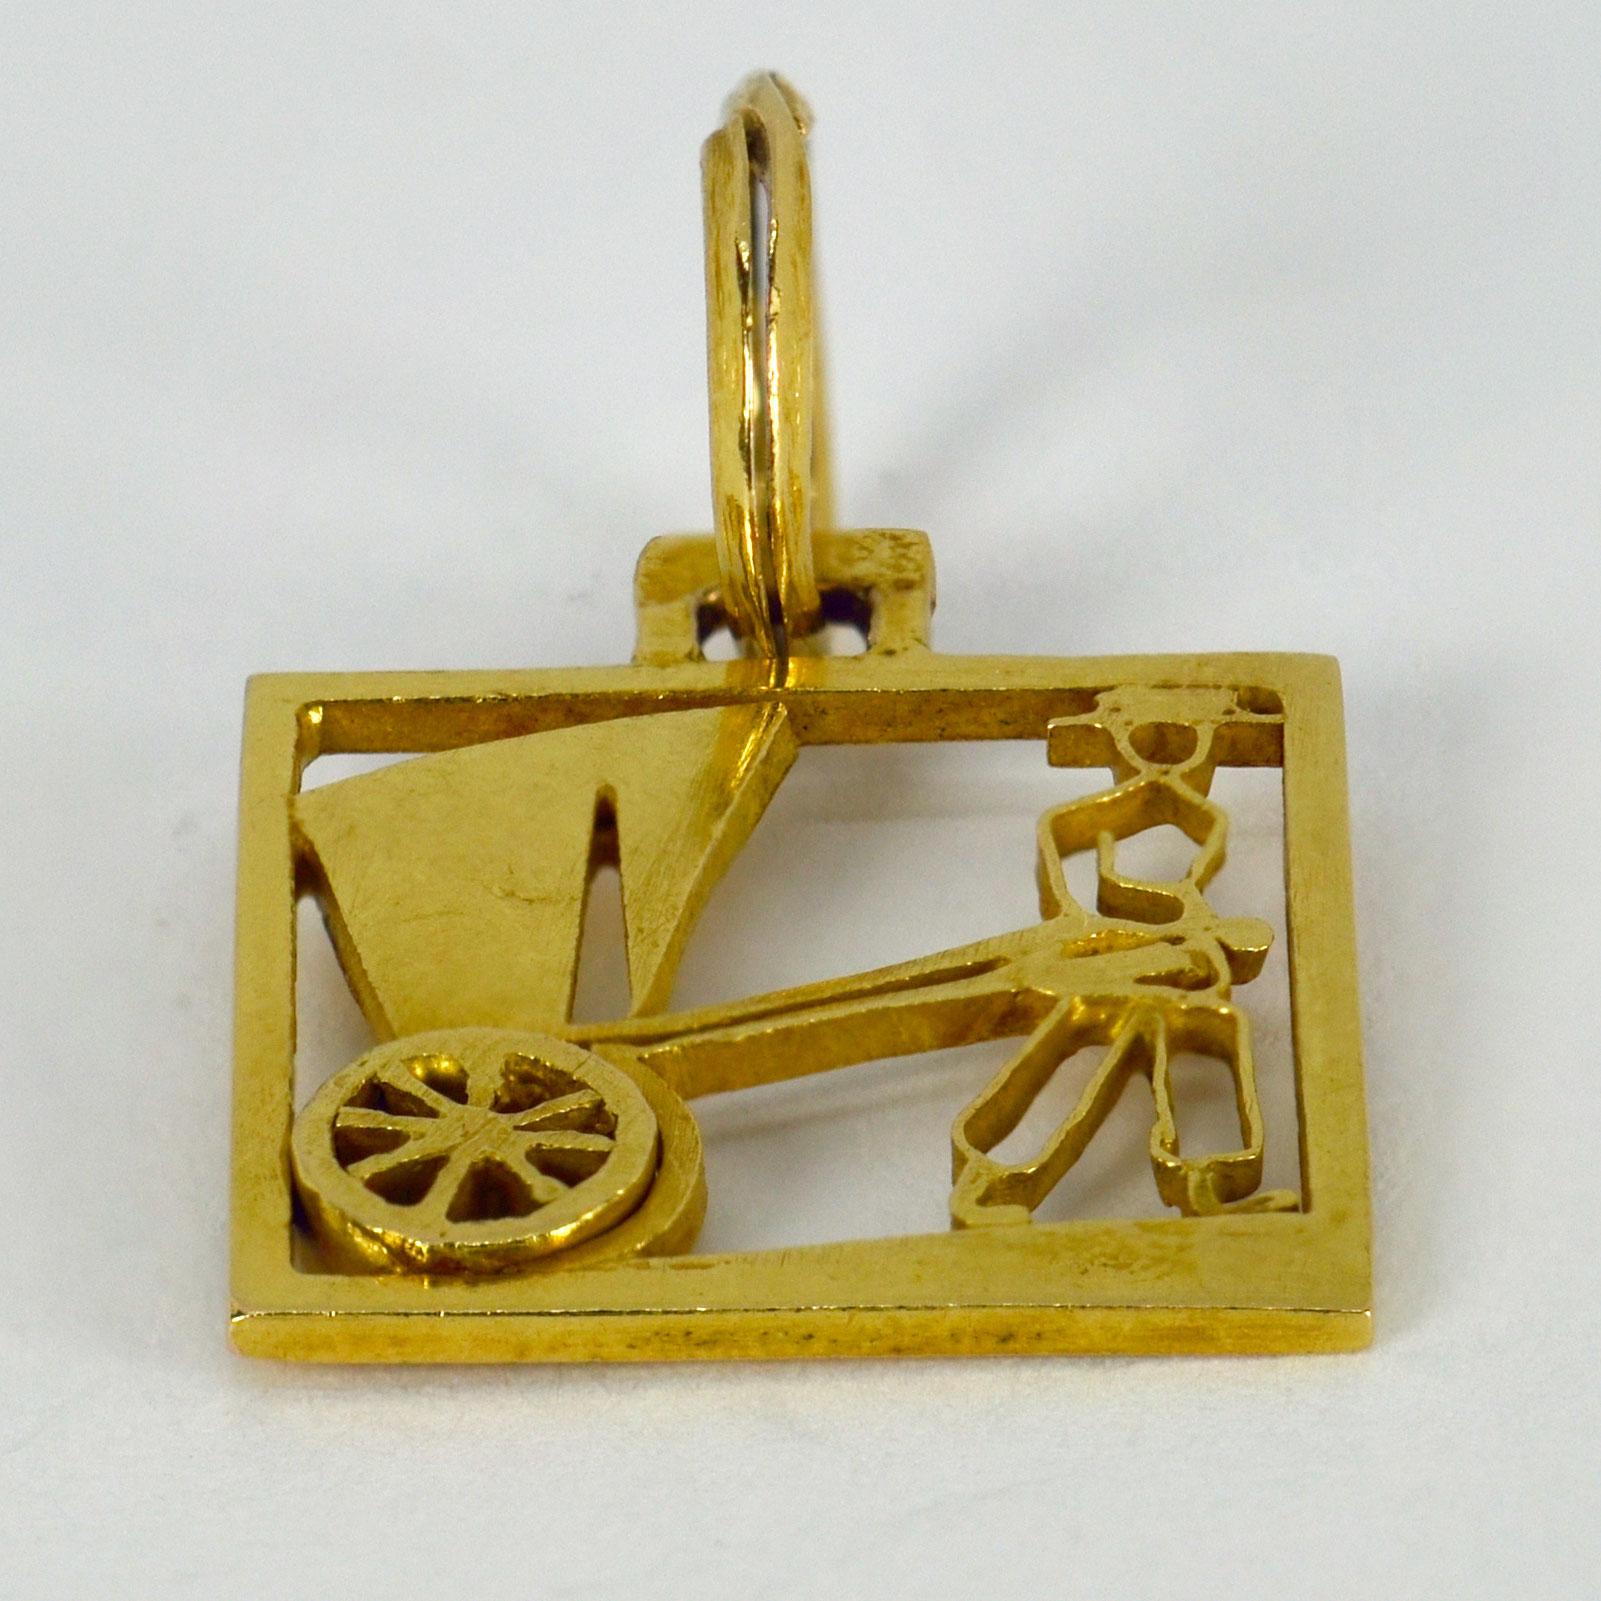 An 18 karat (18K)  yellow gold square charm pendant designed as a rickshaw. Stamped with the owl mark for French import and 18 karat gold.

Dimensions: 1.8 x 1.5 x 0.15 cm (not including jump ring)
Weight: 2.09 grams
